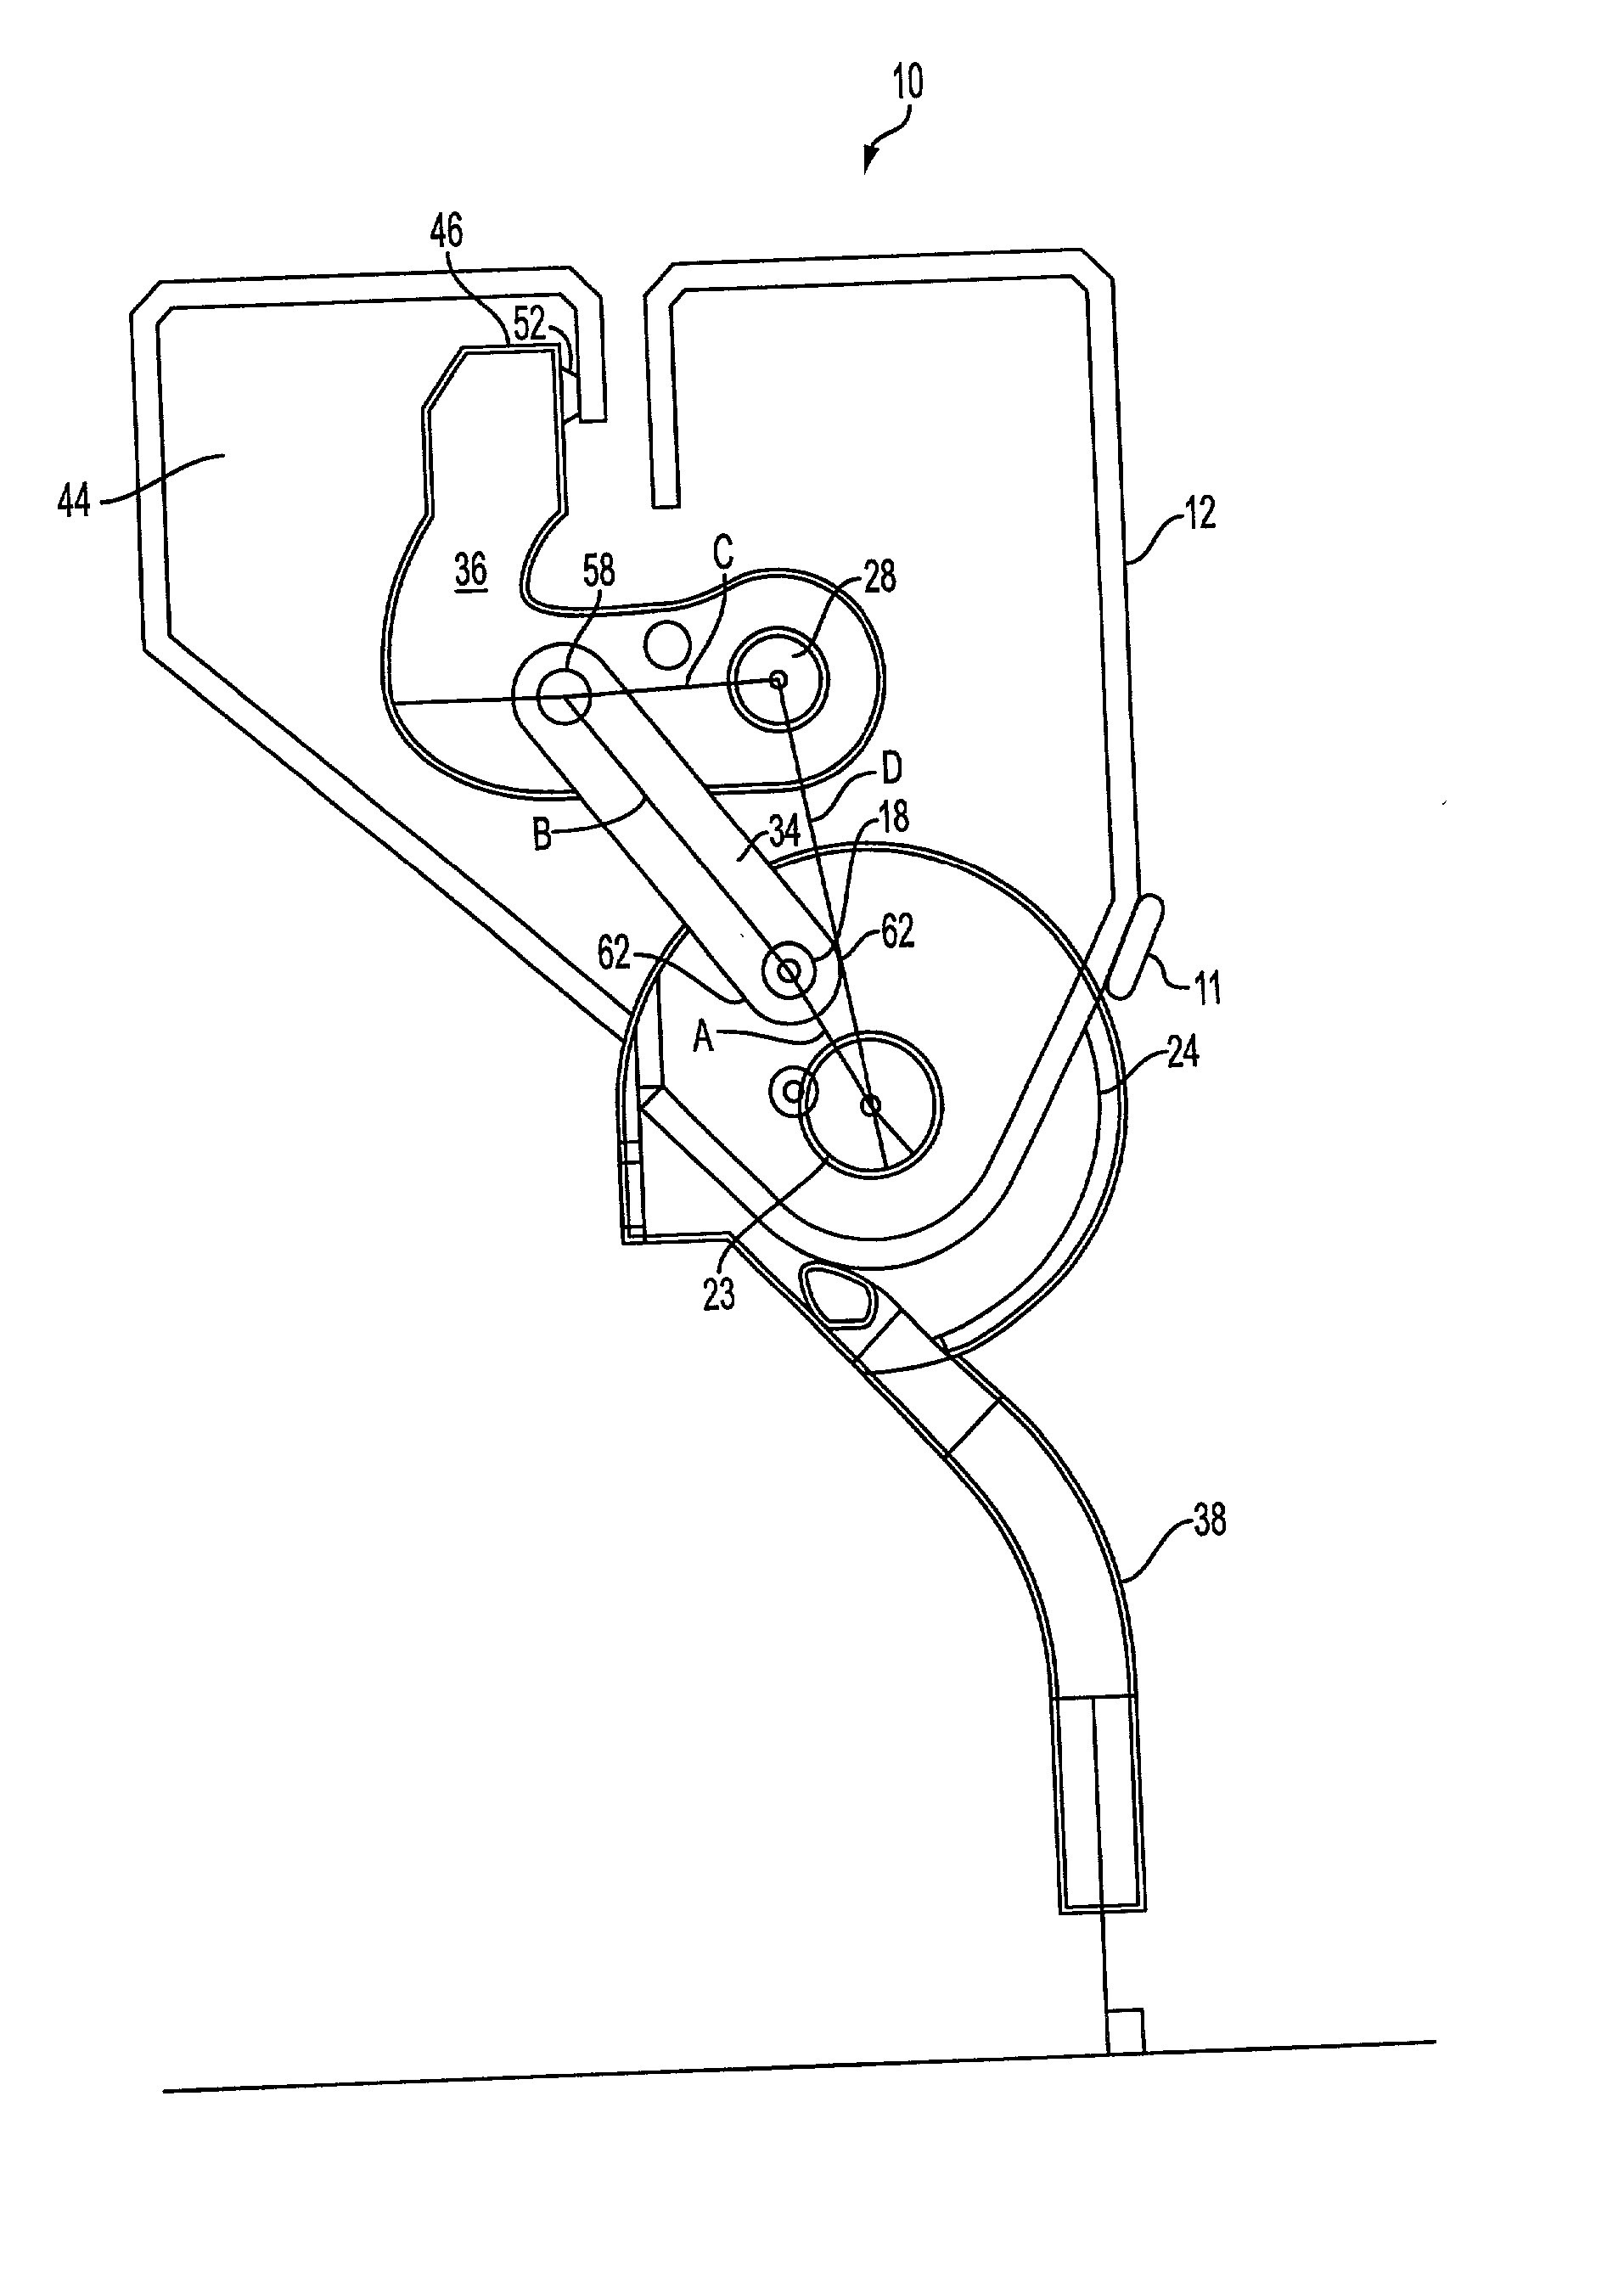 Latching device and method